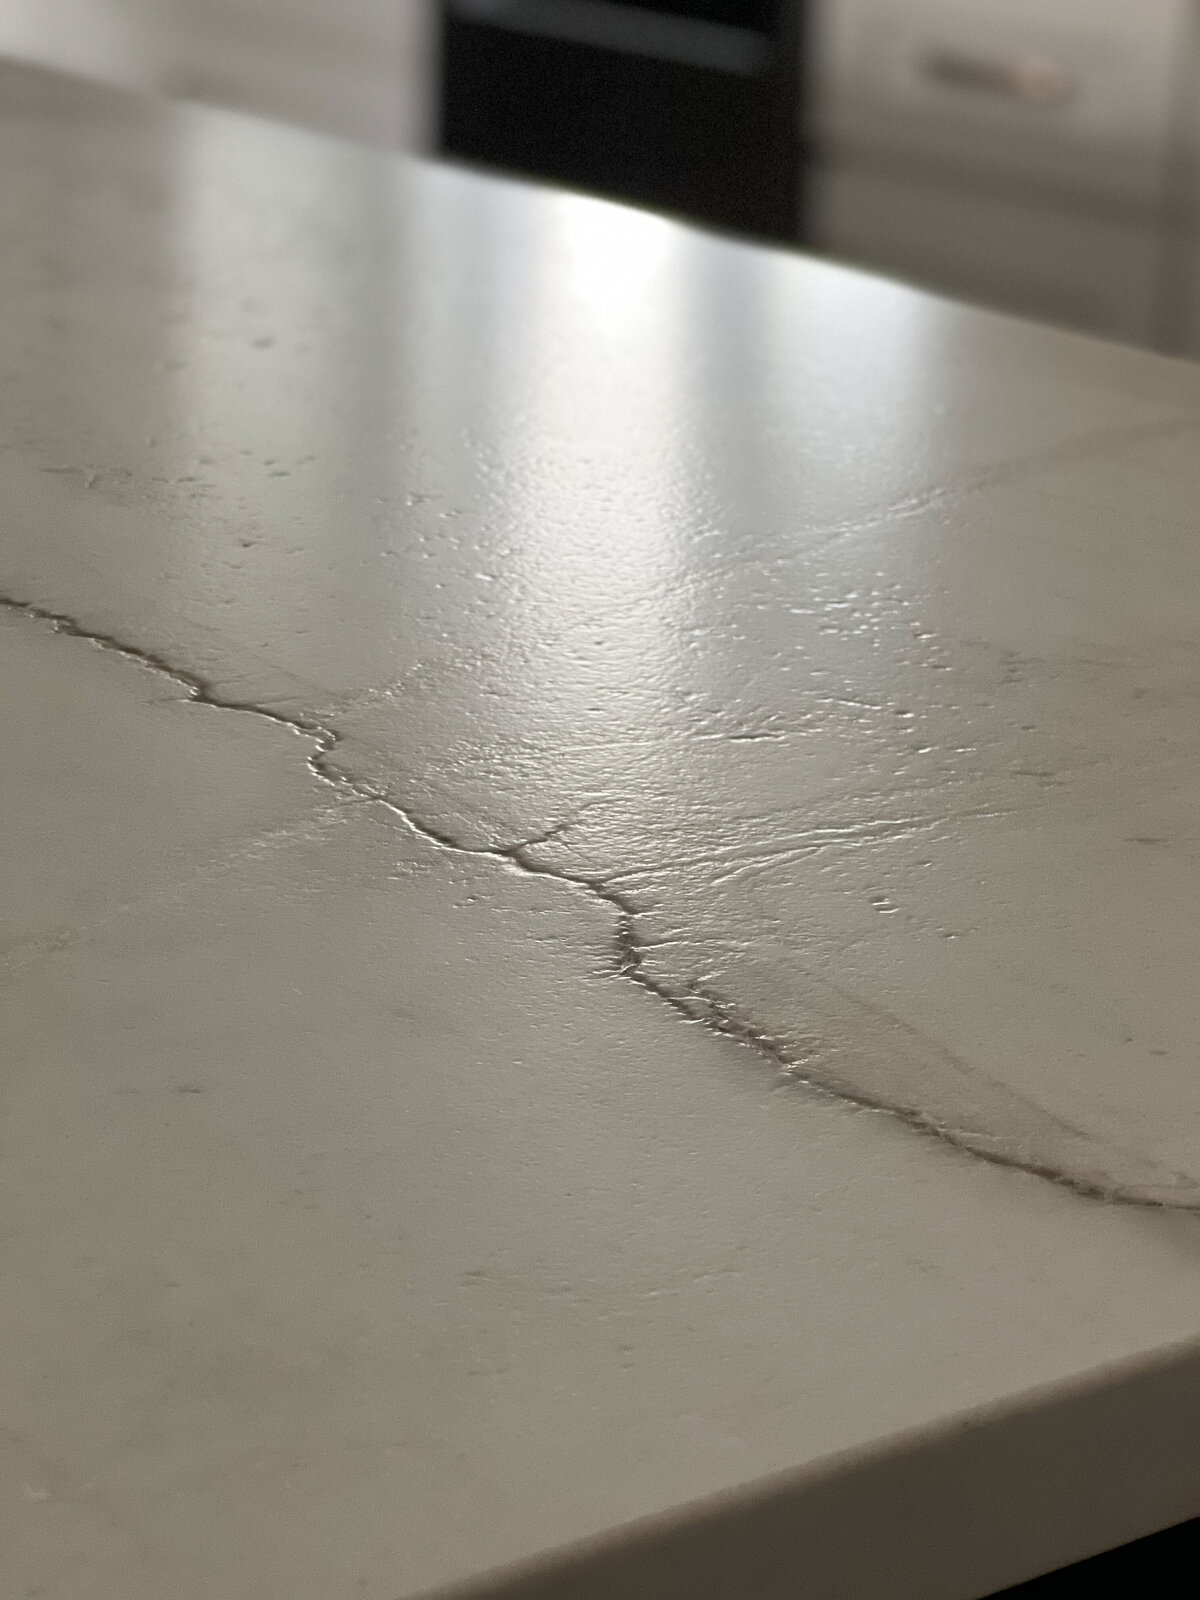 A white countertop shows deep veining and texture